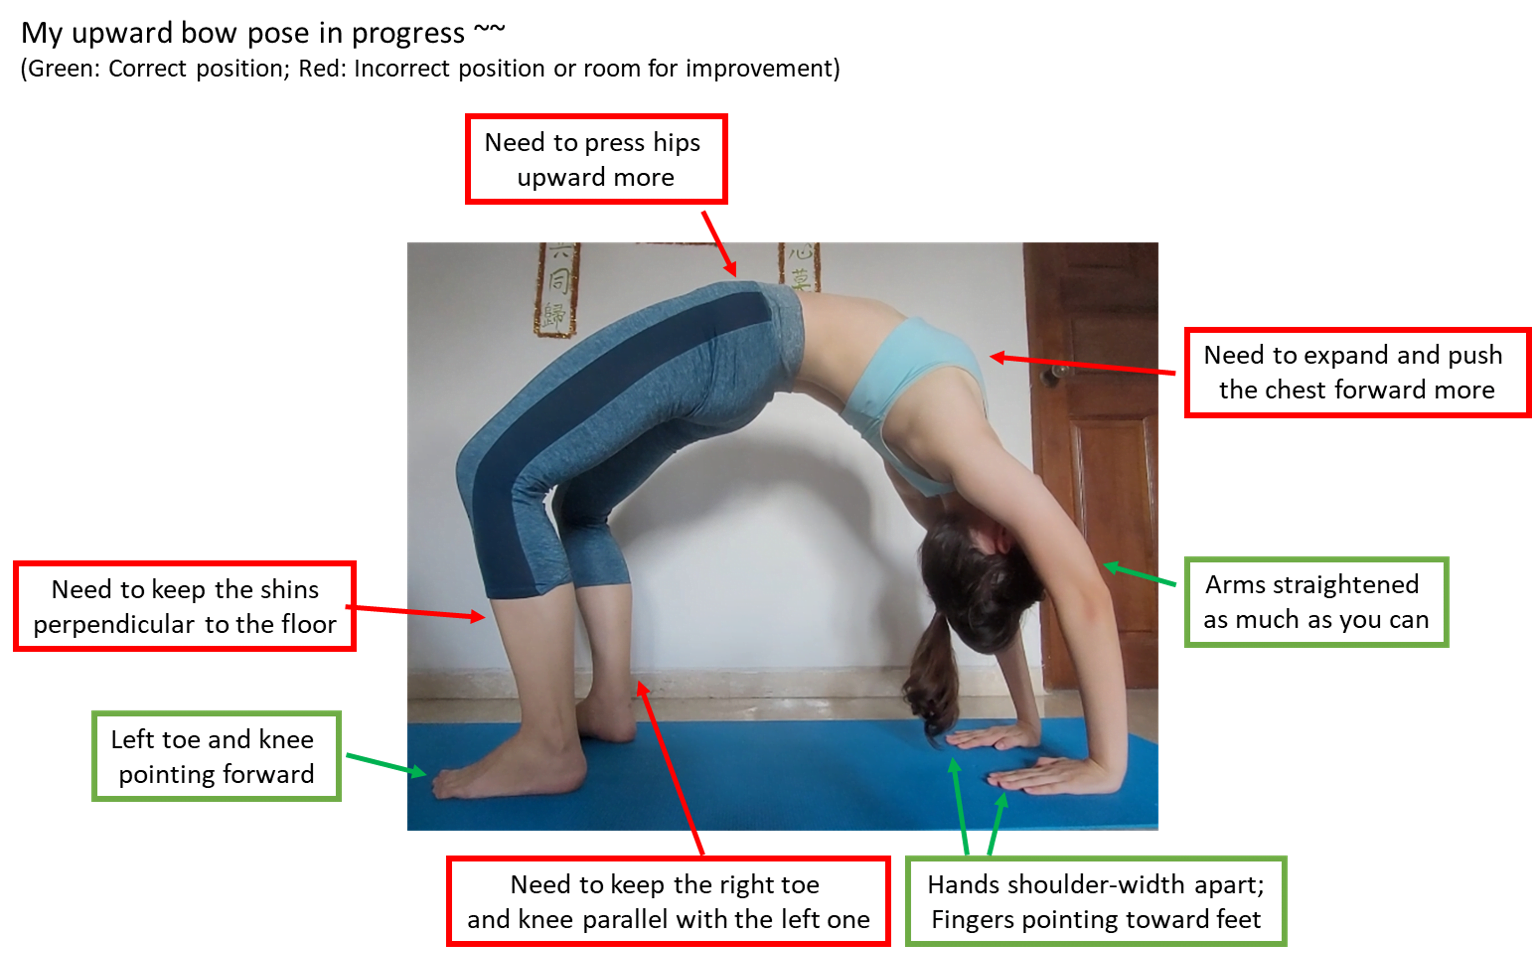 Zuna Yoga - Urdhva Dhanurasana / Upward Facing Bow Pose A strong  intermediate backbend that requires openness in the shoulders, chest and  hip flexors, while demanding enlivenment in both the hands and